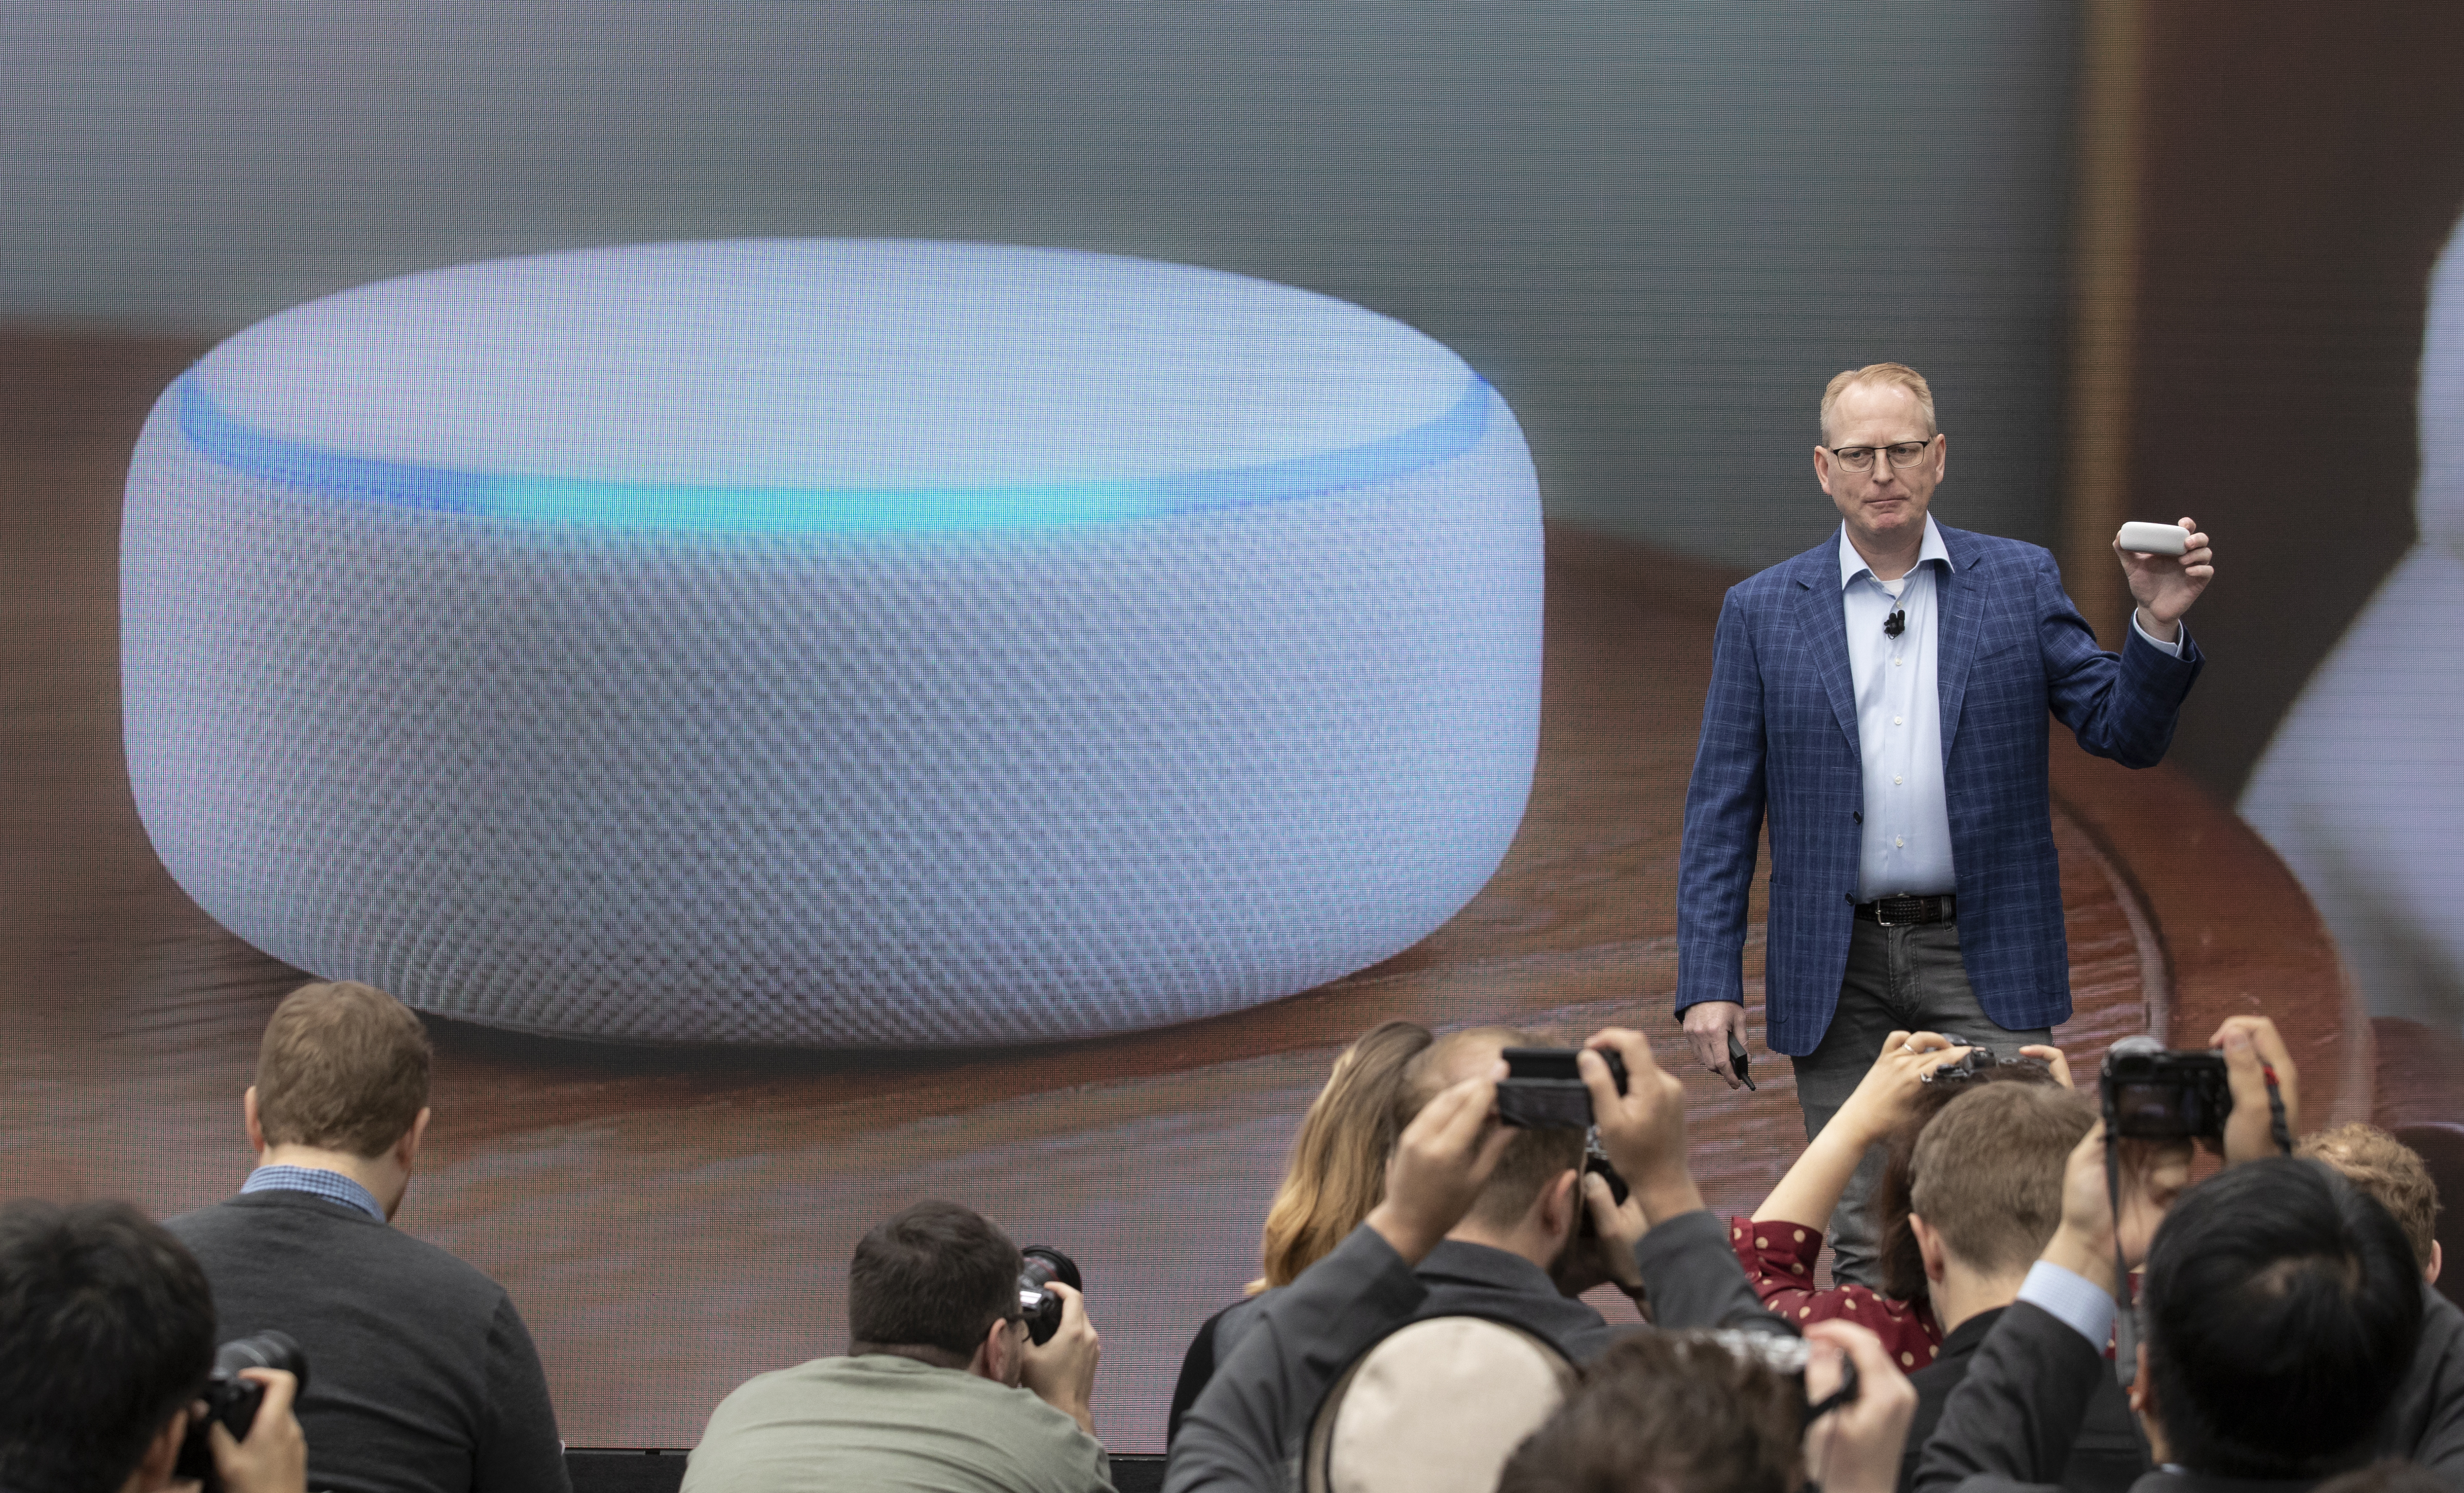 Dave Limp, Senior Vice President of Amazon Devices, stands onstage in front of a picture of a redesigned echo dot device.